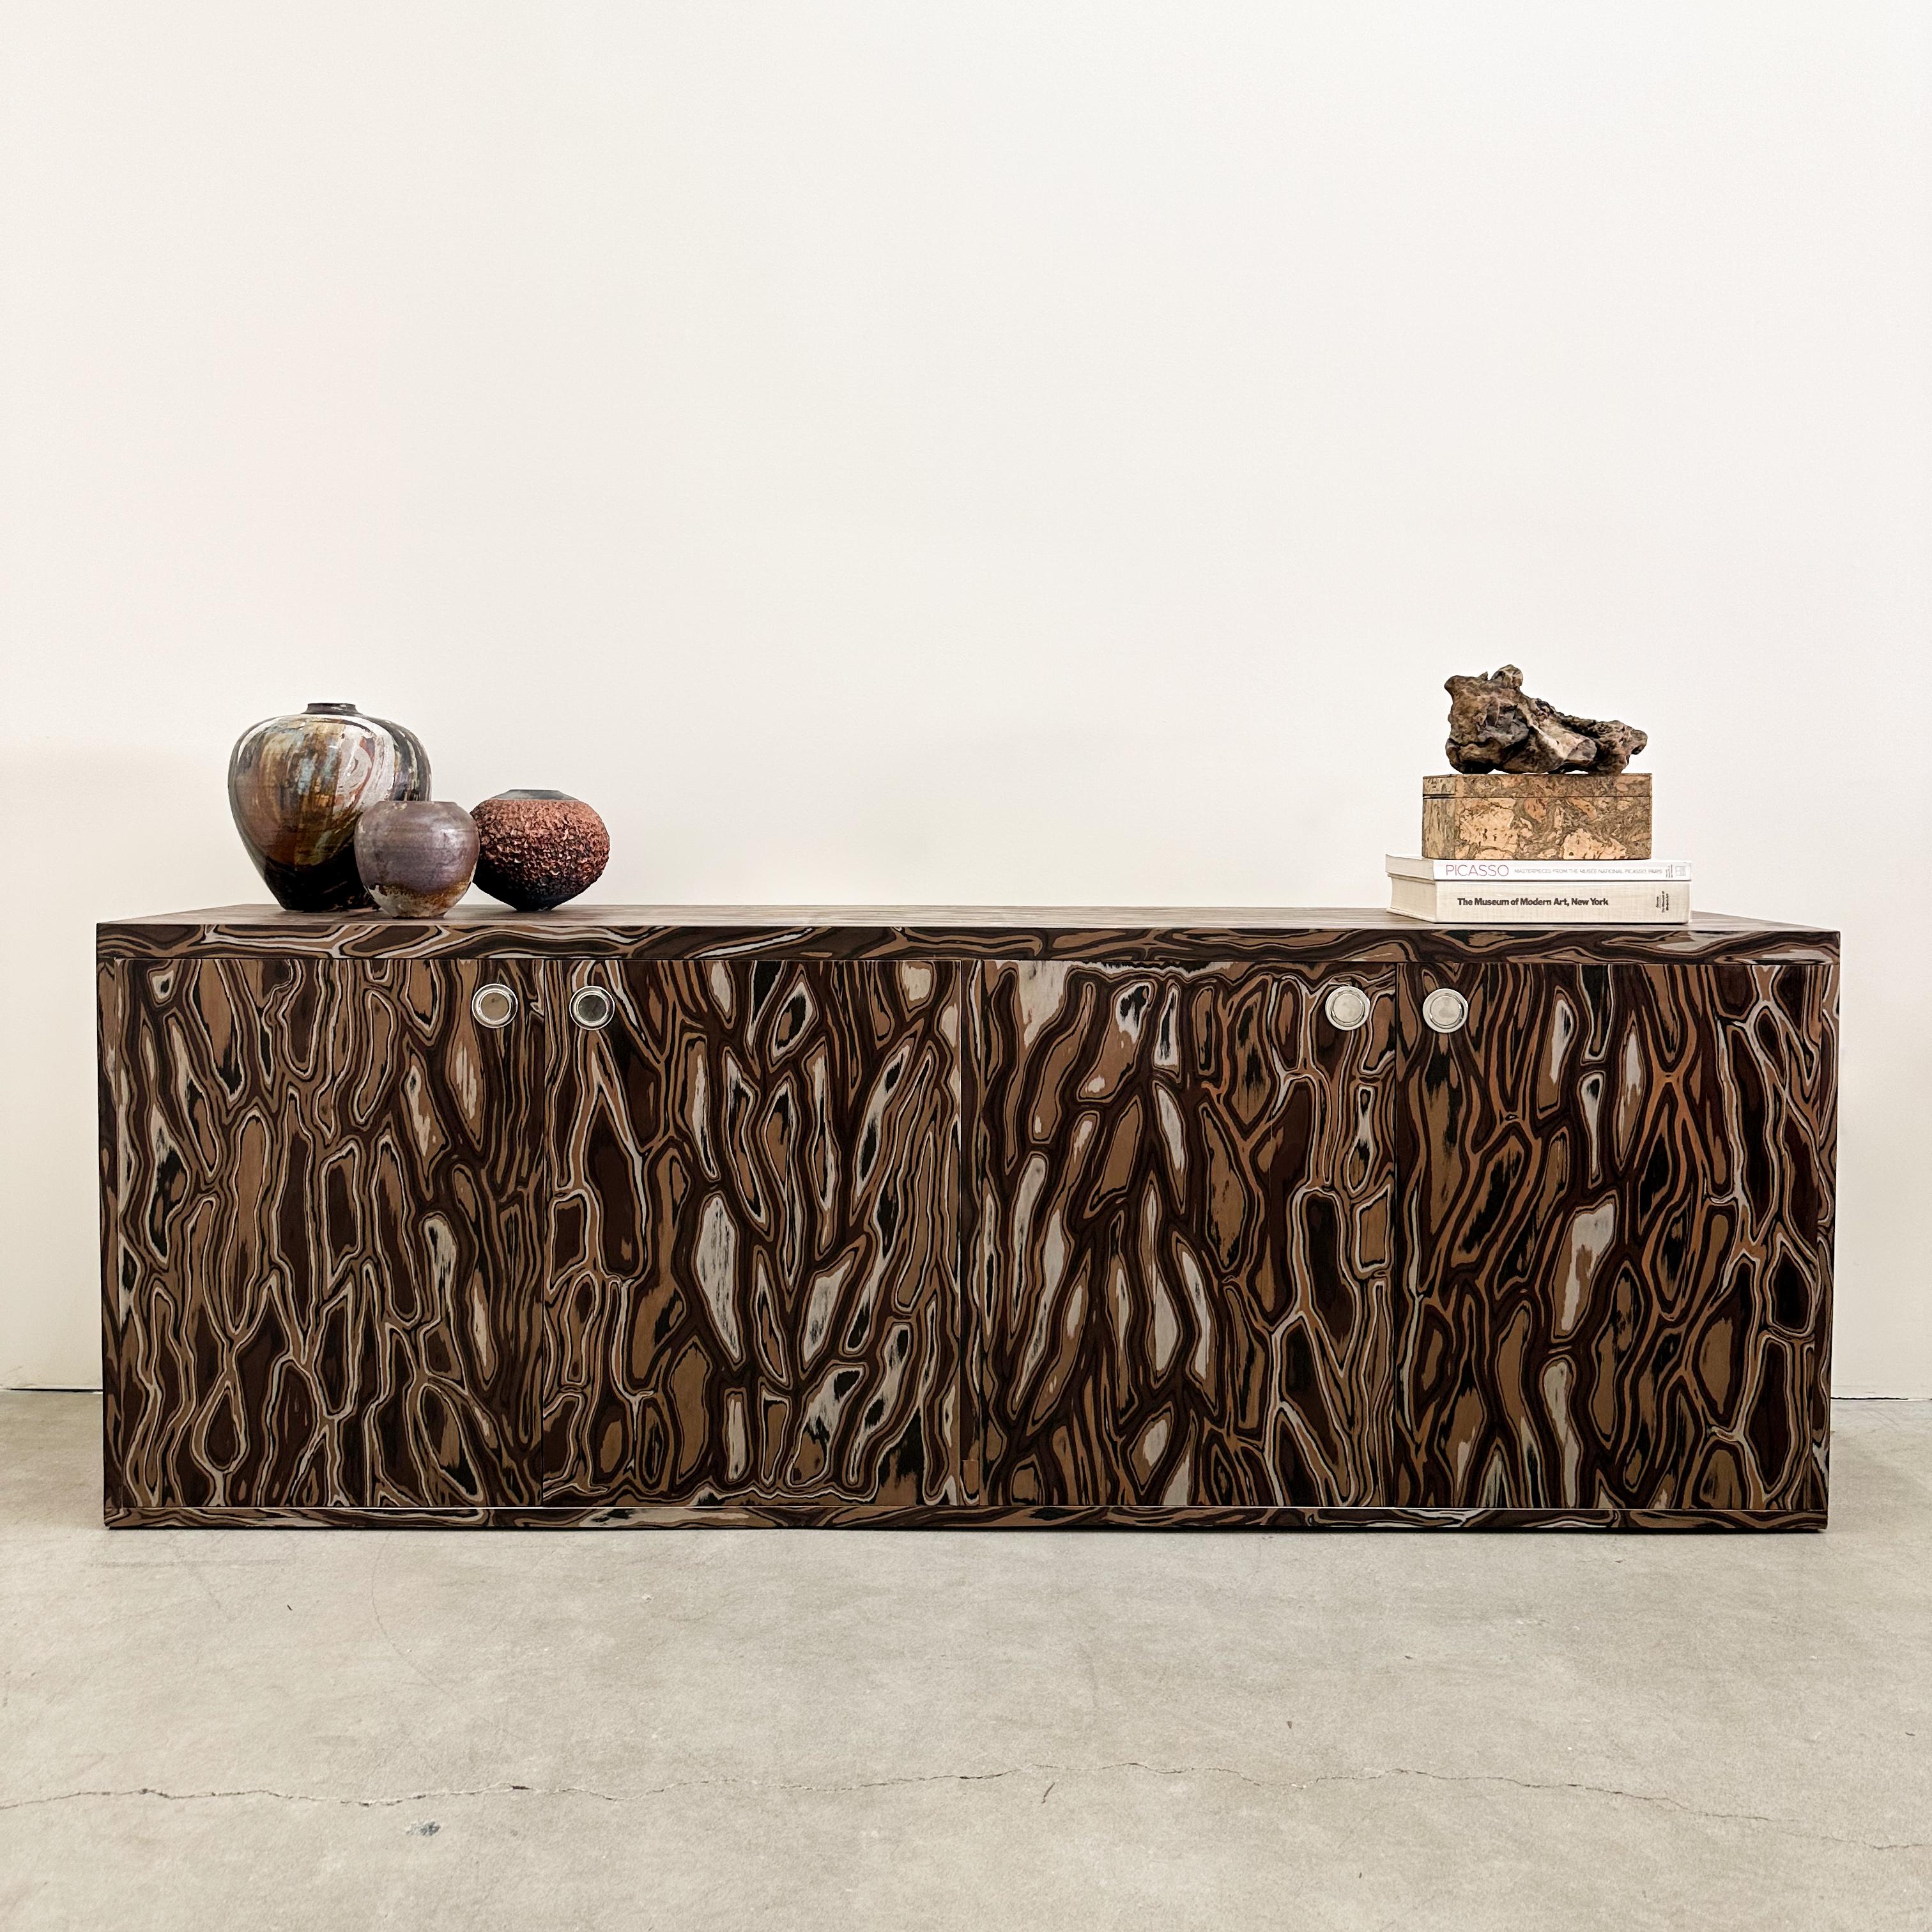 Vintage Credenza Featuring Kengo Kuma Veneer.

The vintage Credenza has been meticulously re-veneered, featuring the original design by Kengo Kuma, a renowned architect recognized for his adept use of natural materials to craft contemporary spaces